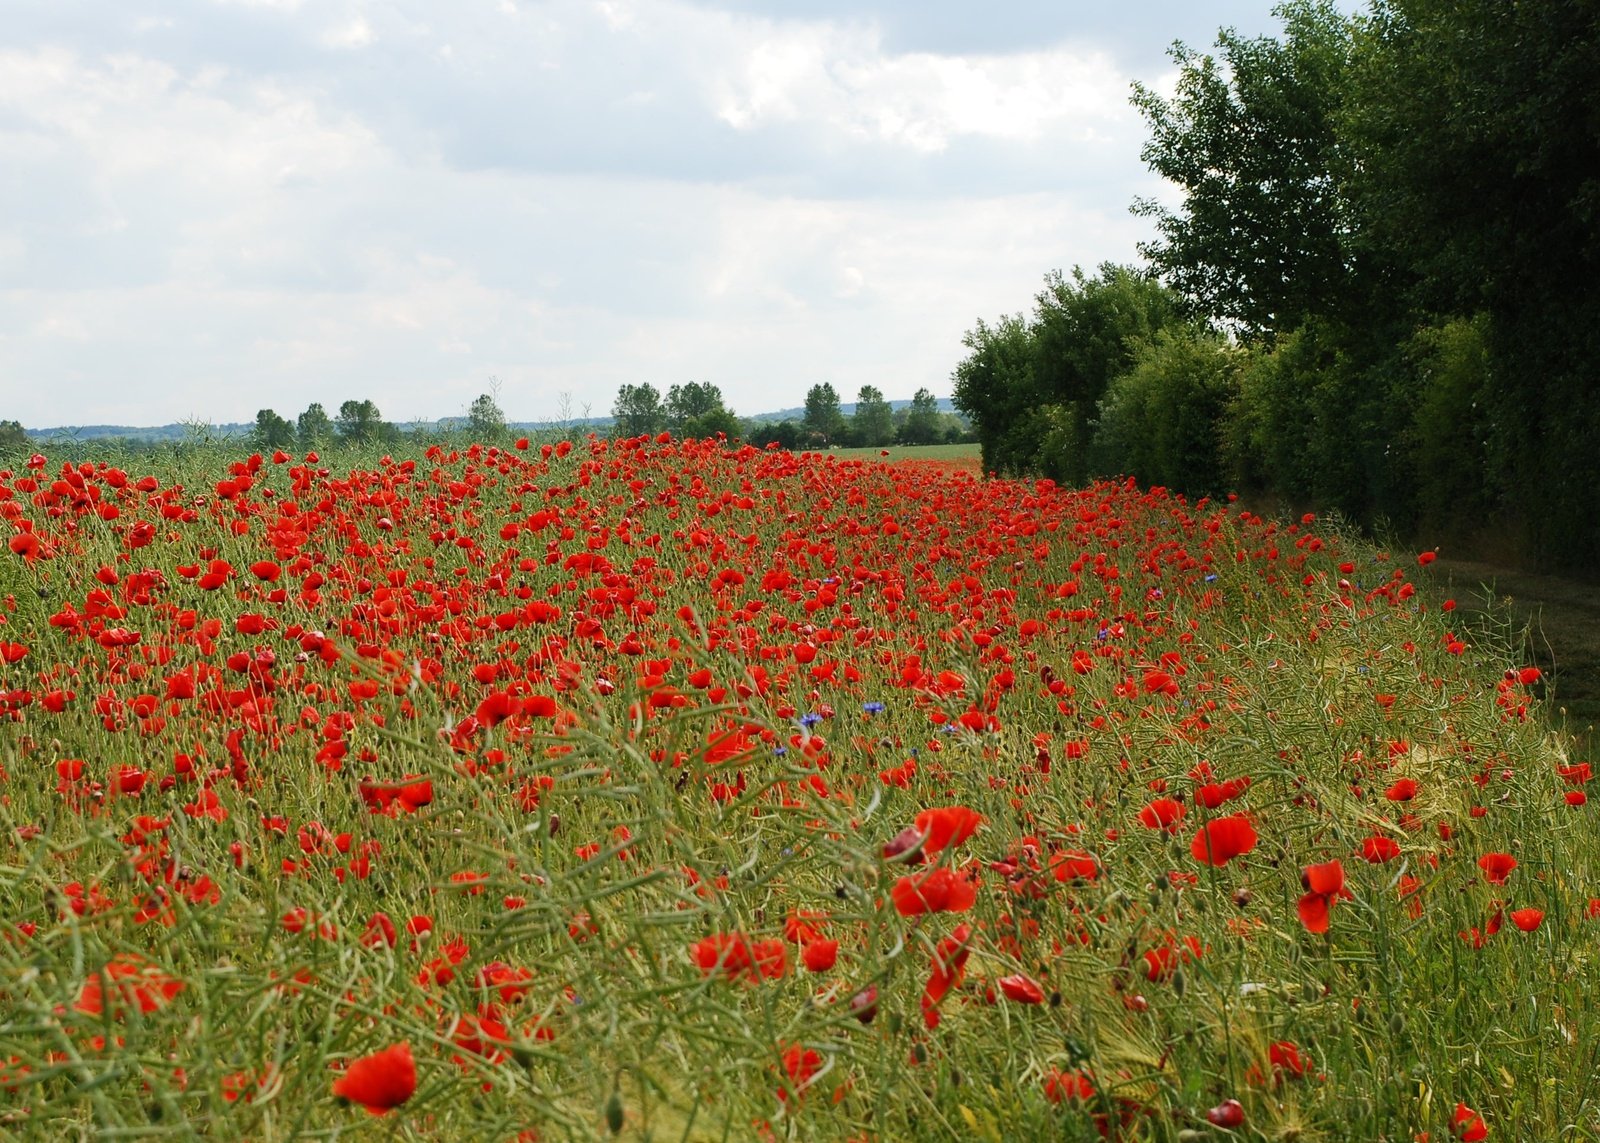 a large field full of red flowers with lots of green foliage